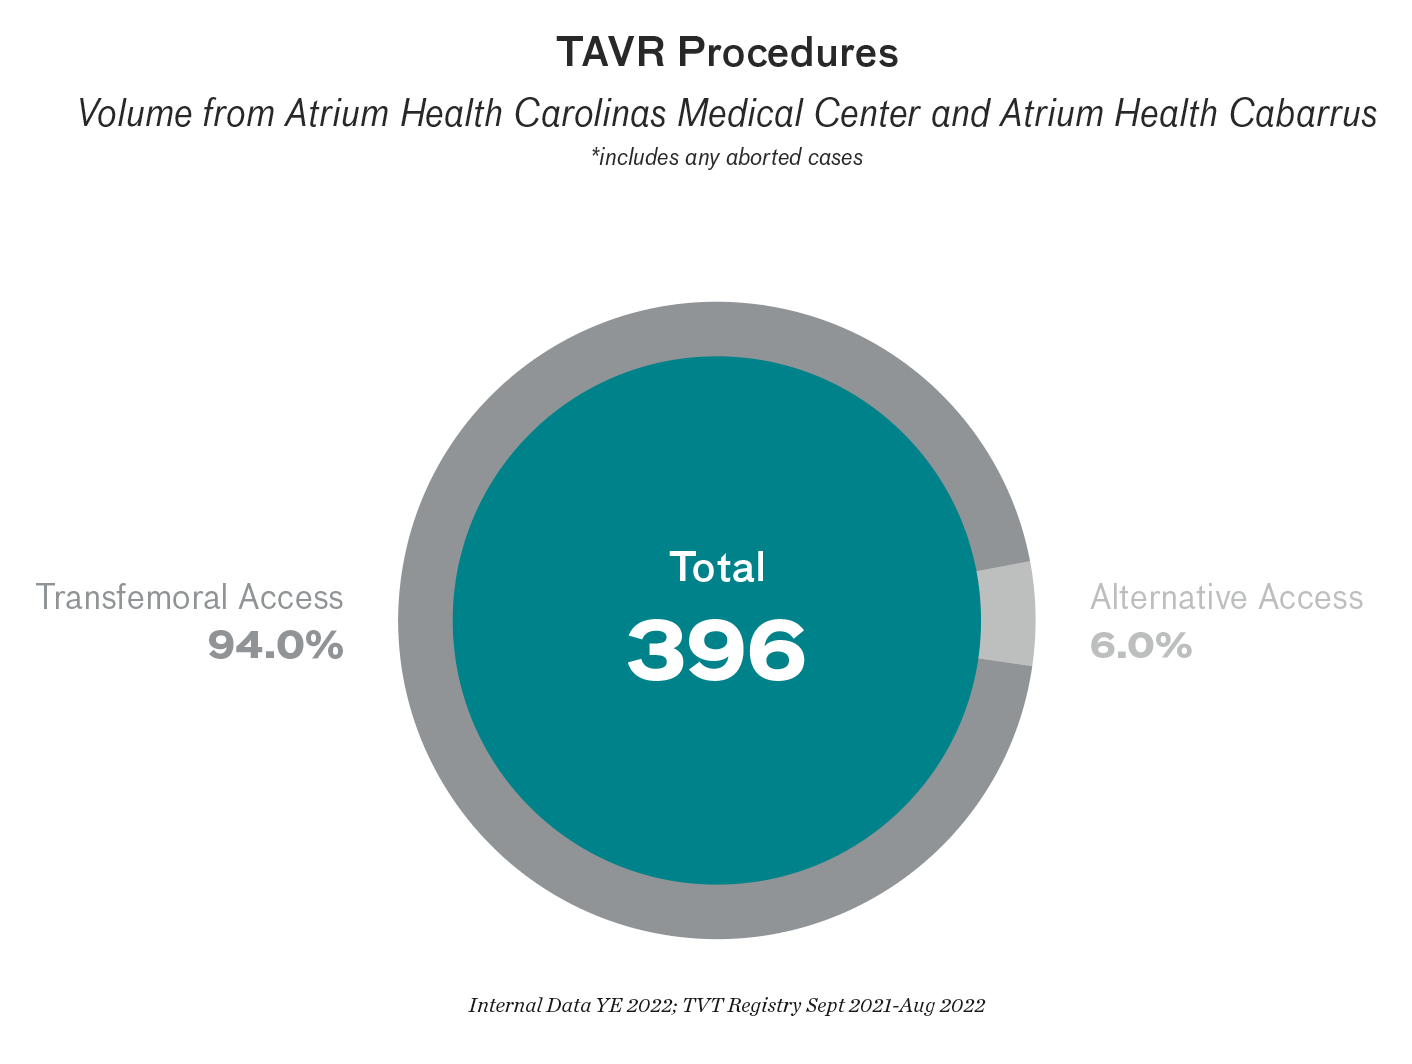 TAVR Procedures: Volume from Atrium Health Carolinas Medical Center and Atrium Health Cabarrus (includes aborted procedures). Total being 396. Transfemoral Access being 94 percent. Alternative Access being 6 percent. Source: Internal Data YE 2022; TVT Registry Sept 2021-Aug 2022.